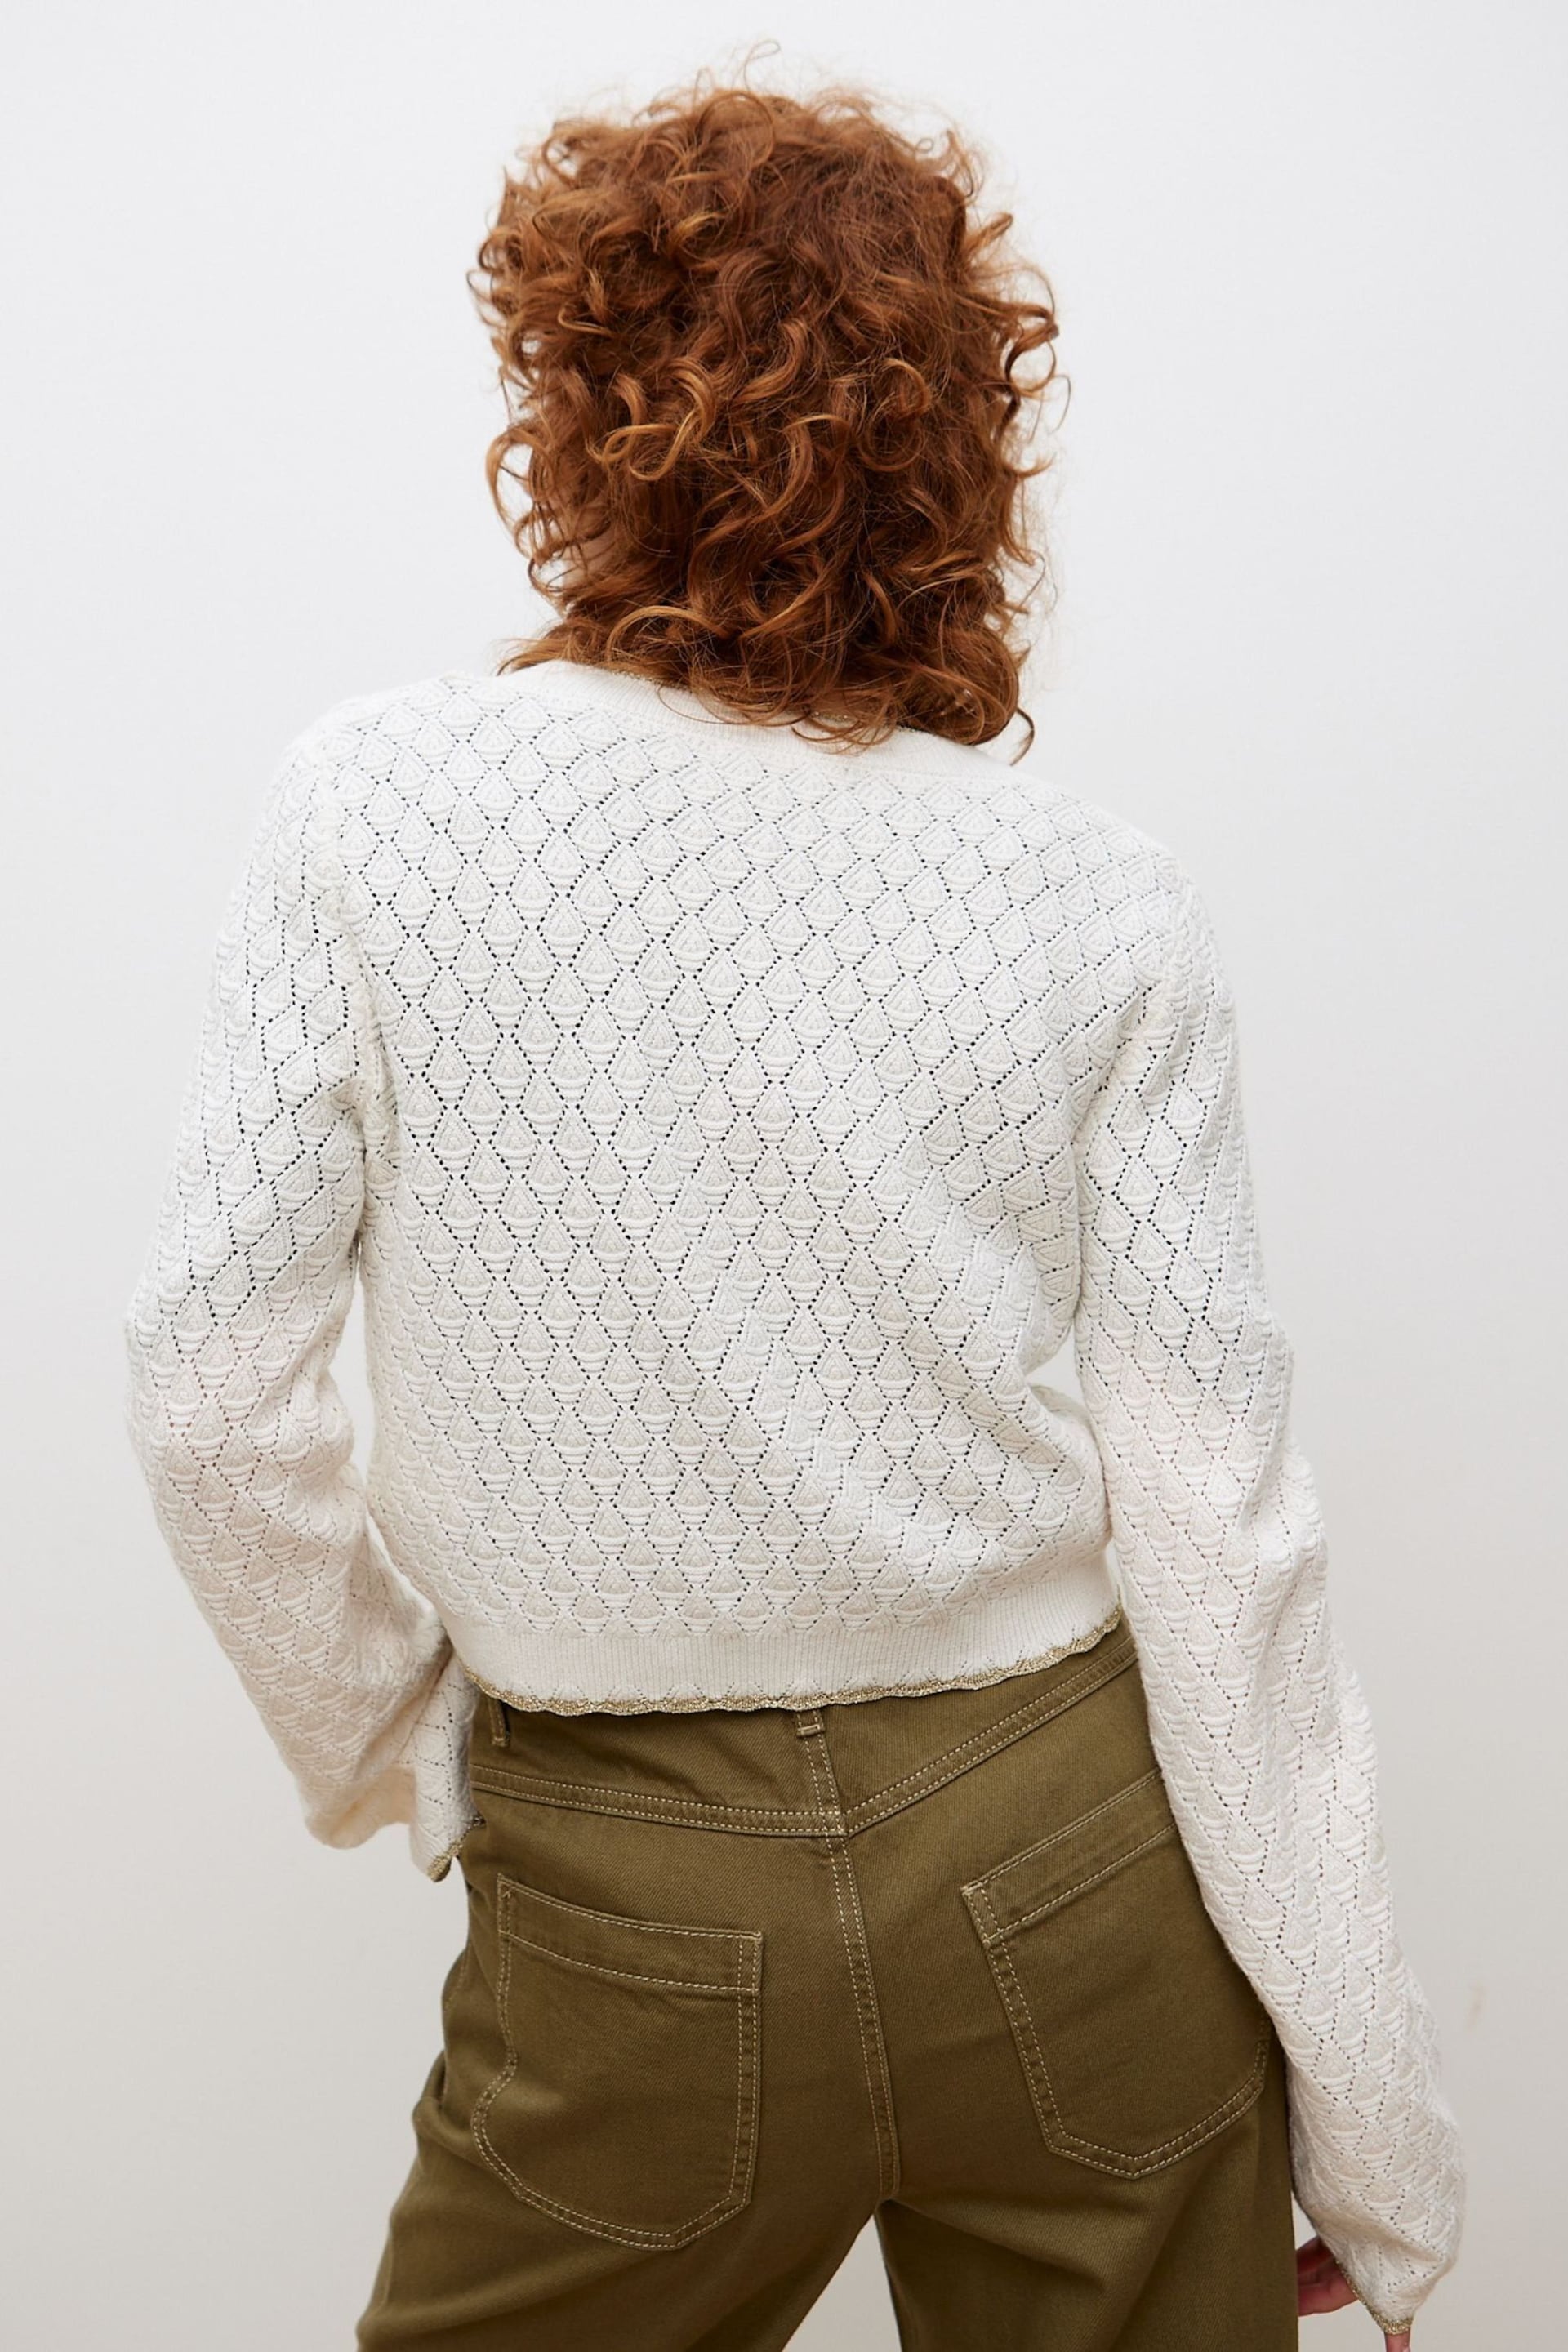 Oliver Bonas White Sparkle Knitted Tie Cardigan - Image 2 of 9